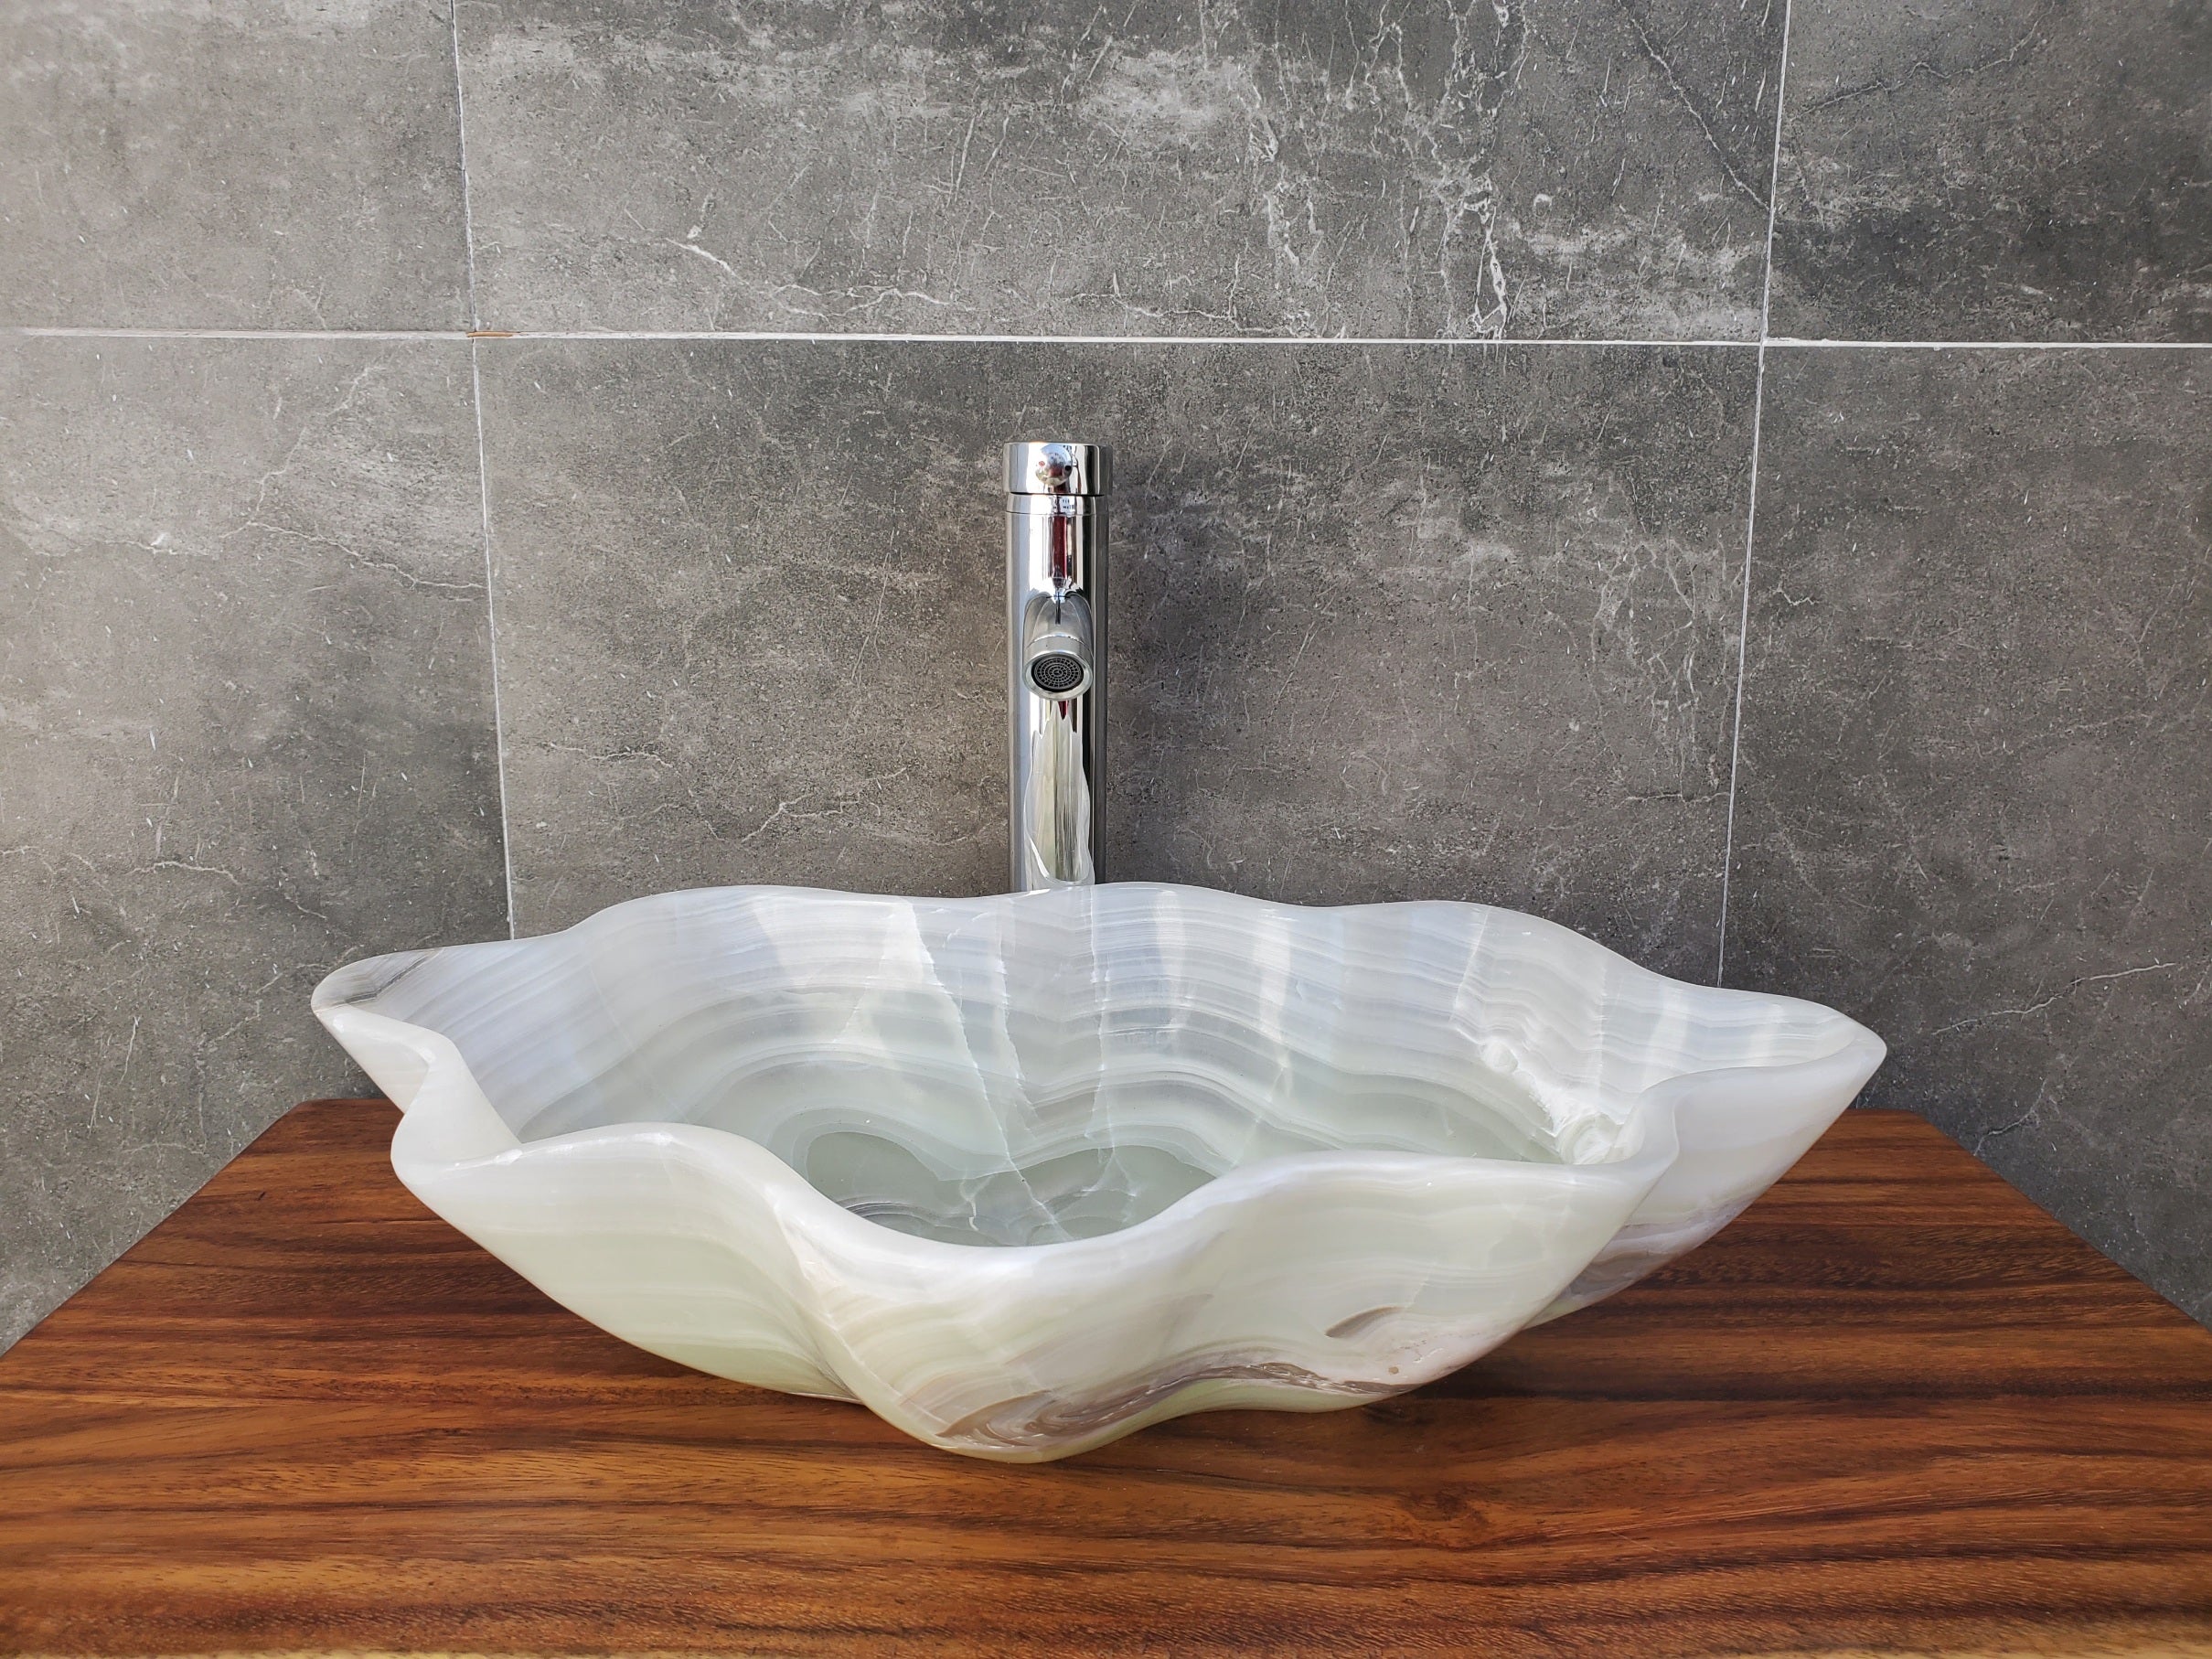 White Onyx Stone Bathroom Vessel Sink. Above counter sinks. High-polished Epoxy and Light Stone Sealant for the inner bowl are available. Hand finished. Made in Mexico. Hand Finished in USA. Buy Now at www.felipeandgrace.com